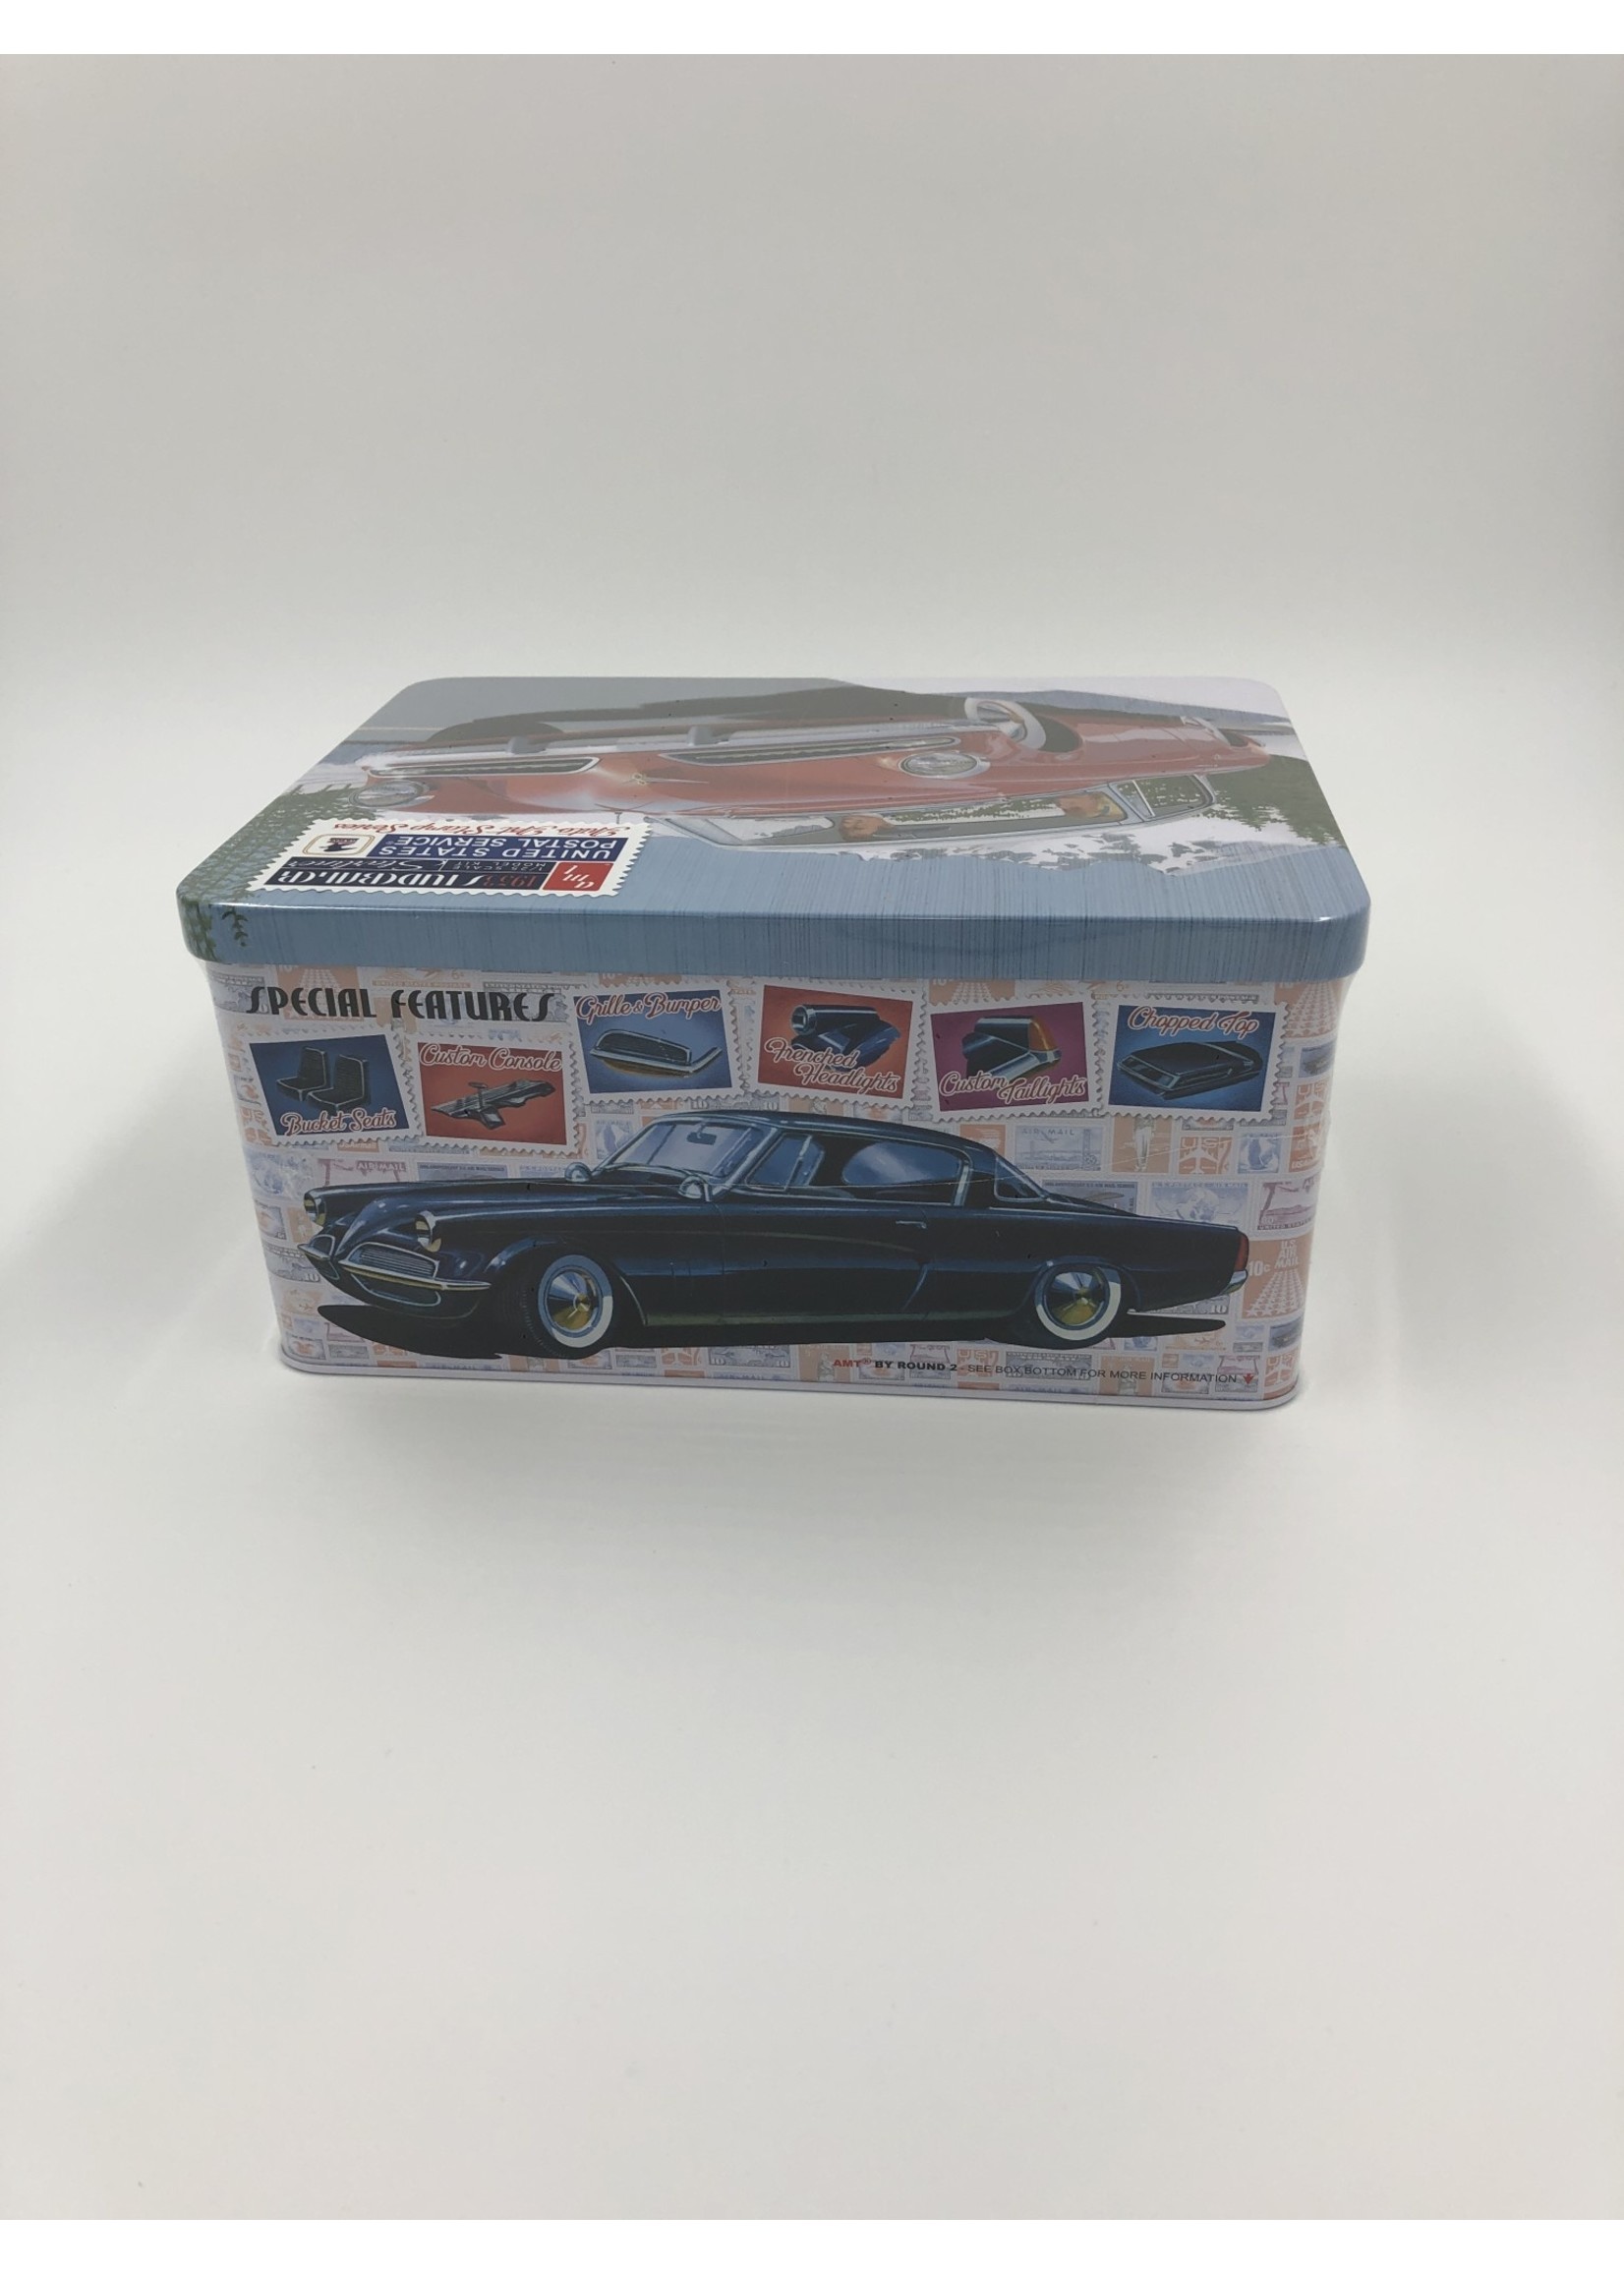 Models AMT 1953 STUDEBAKER STARLINE - USPS (1/25) w/COLLECTABLE TIN